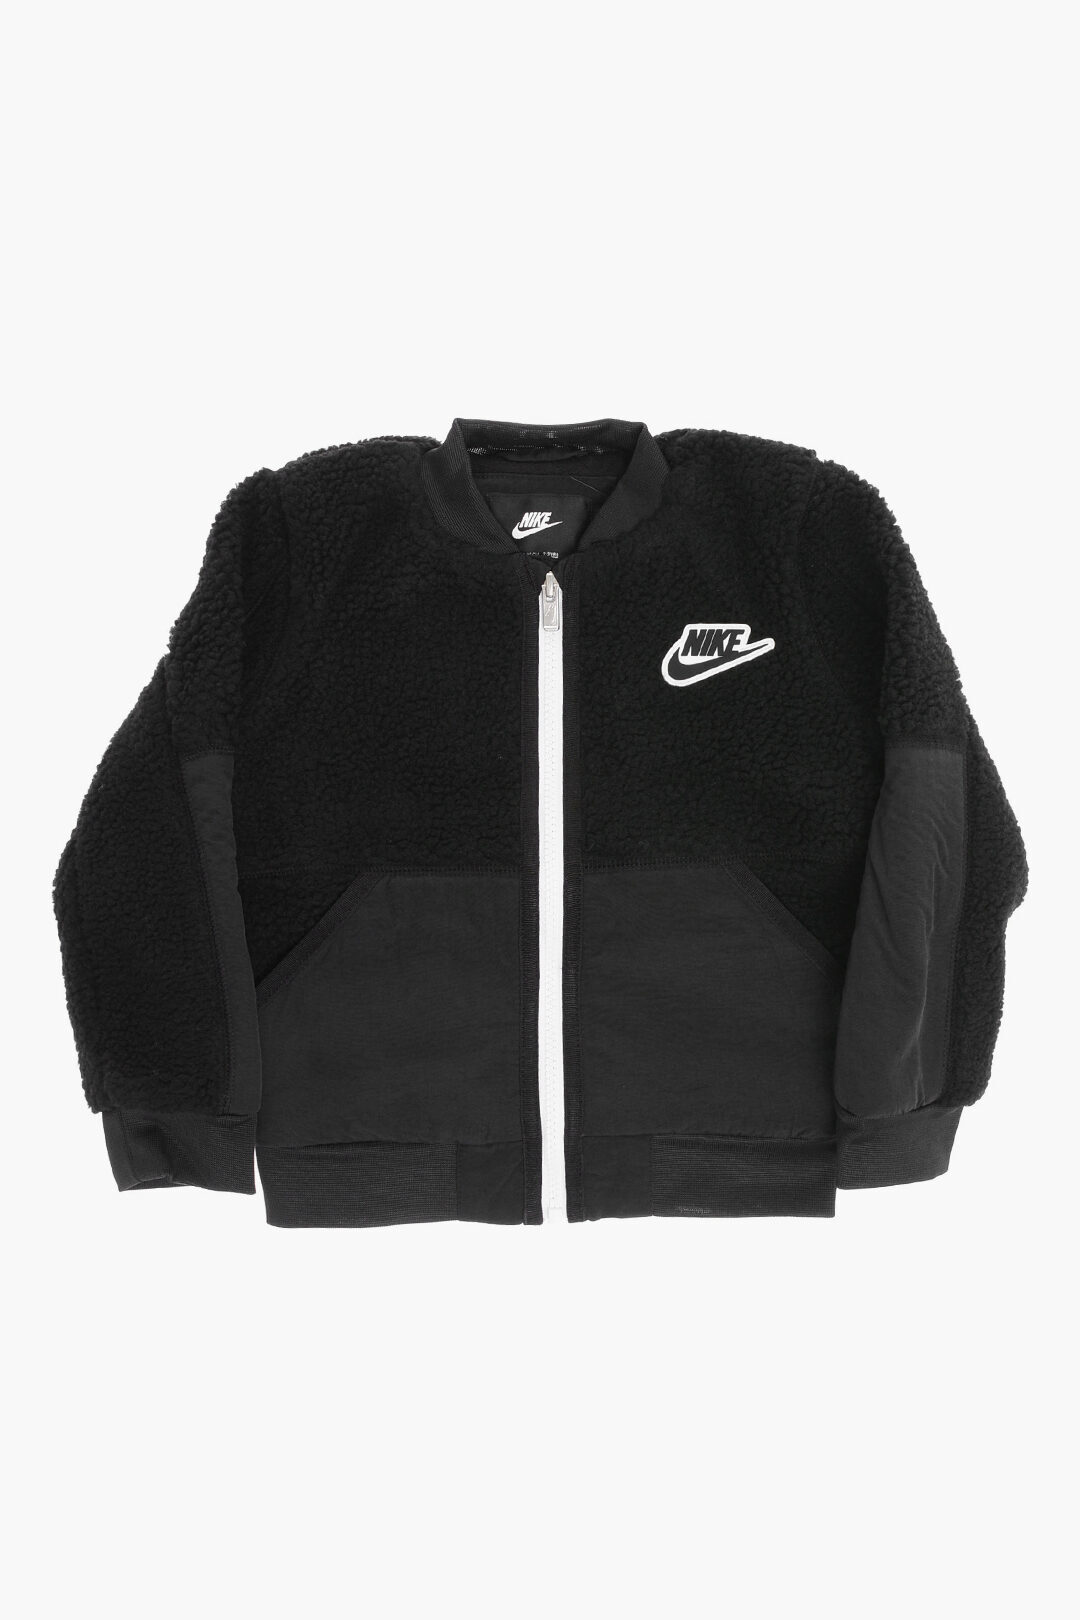 NIKE KIDS ナイキ ジャケット 86K912-023 ボーイズ SHERPA BOMBER WITH CONTRAST ZIP-CLOSURE 【関税・..